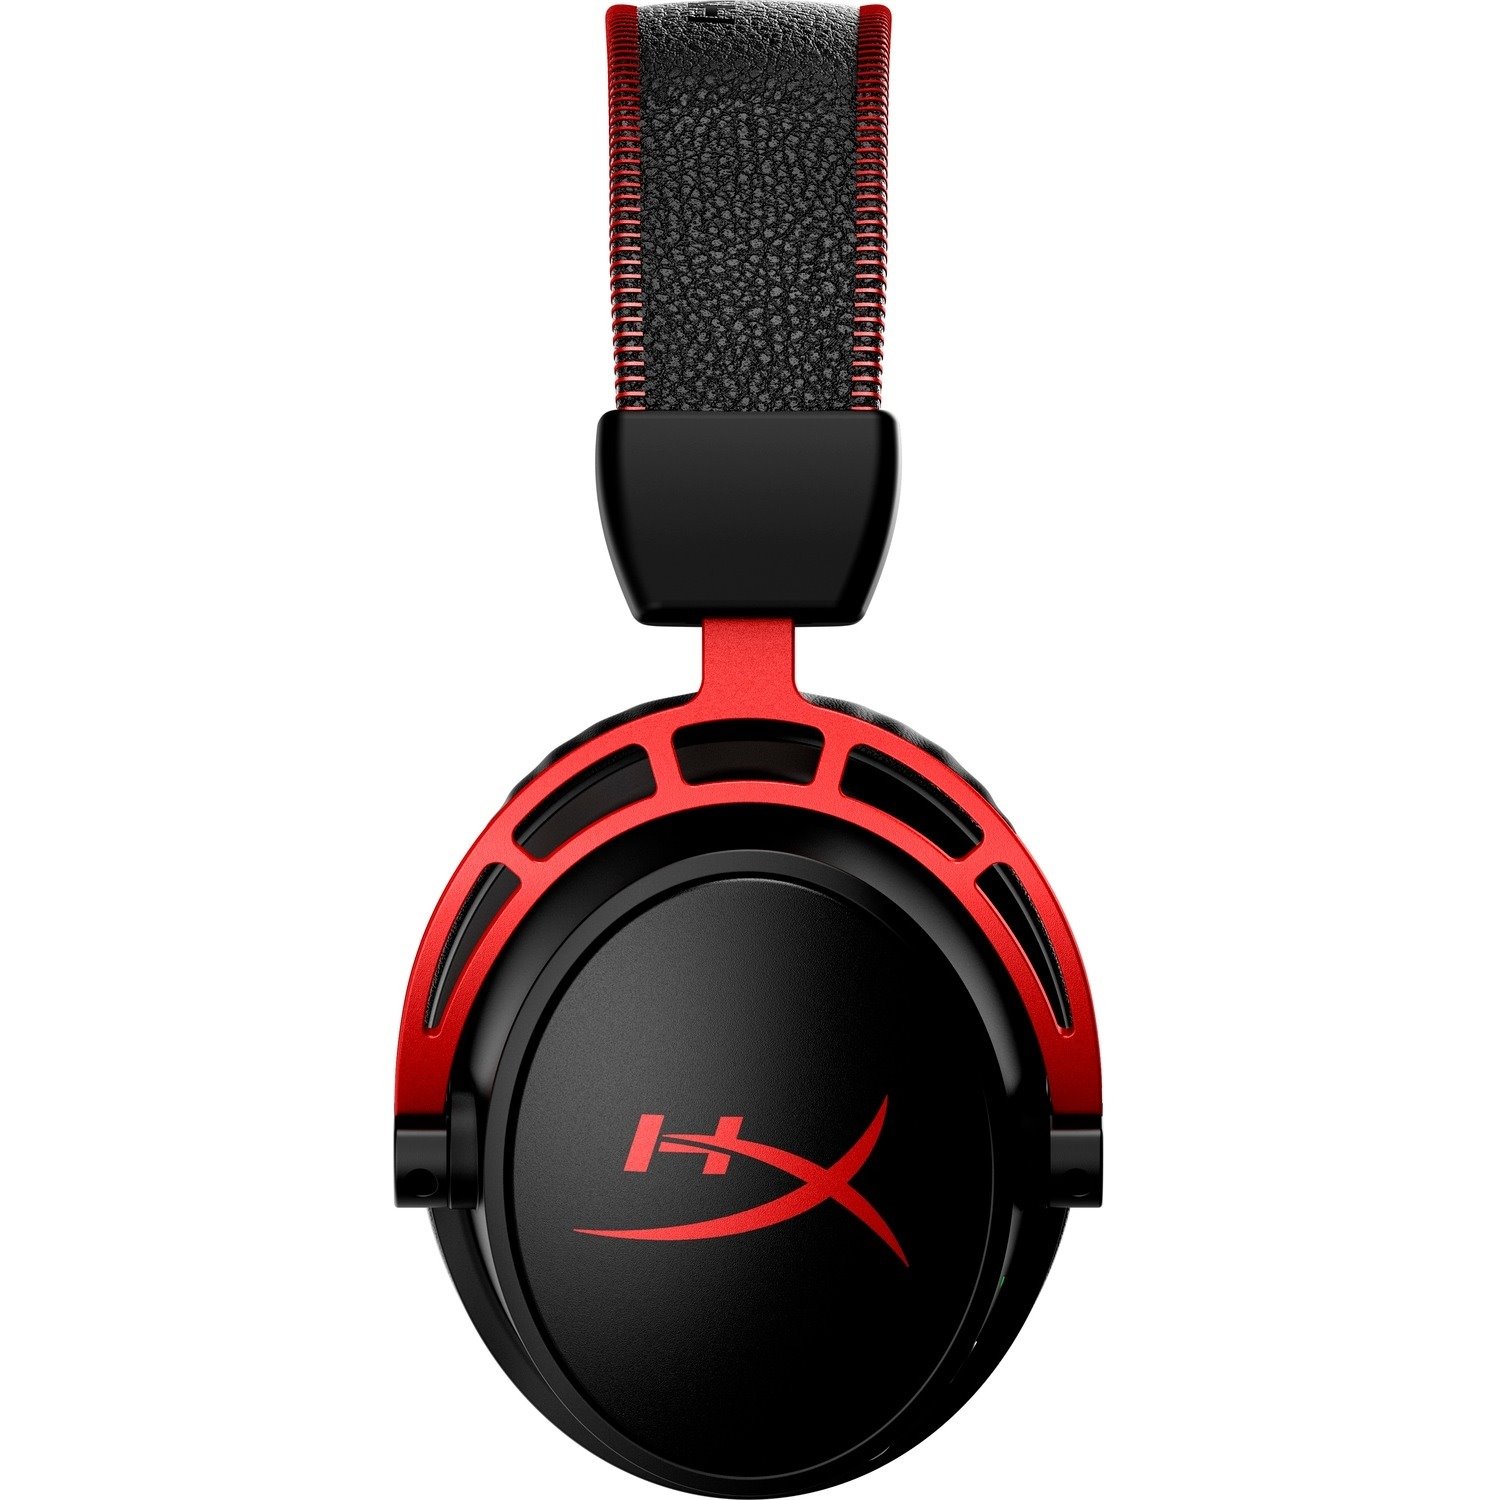 HyperX Cloud Alpha Wireless Over-the-ear Stereo Gaming Headset - Black Red